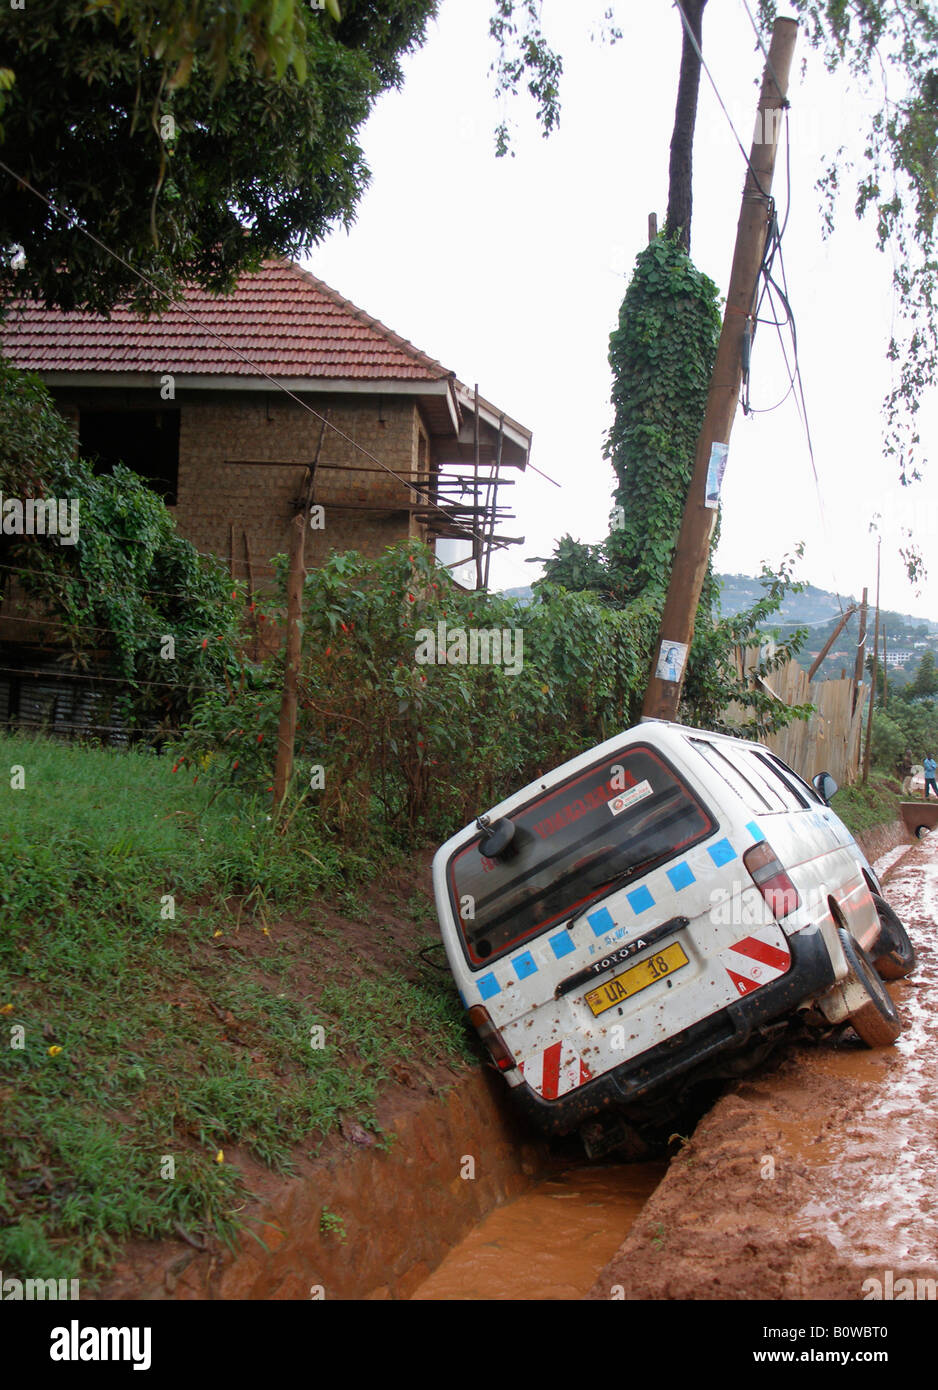 Minibus taxi (matatu) after sliding off the road and into a ditch in Kampala, Uganda Stock Photo